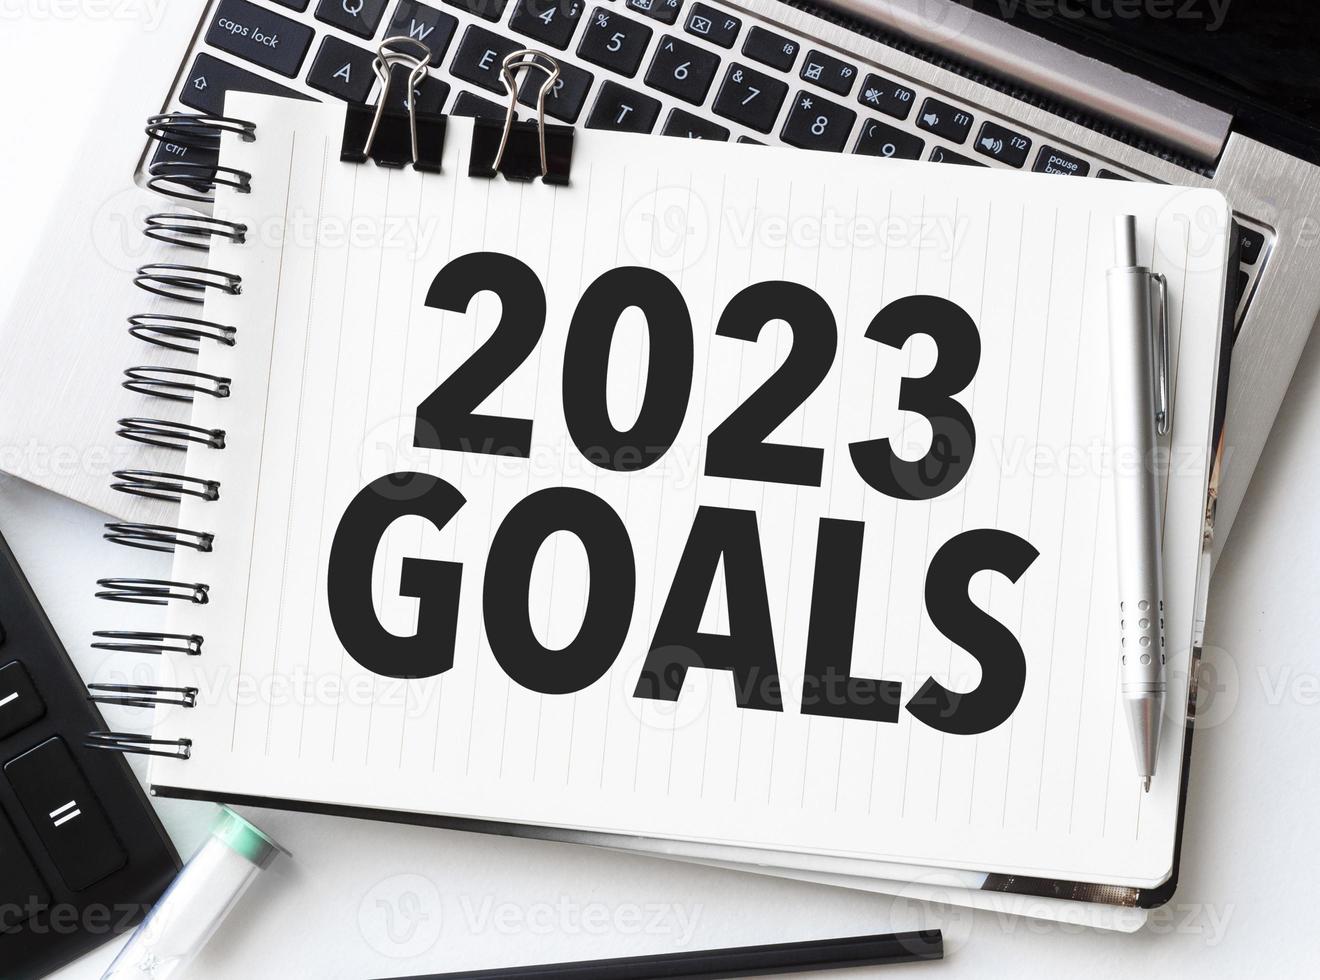 goals 2023 on notebook with laptop and calculator photo